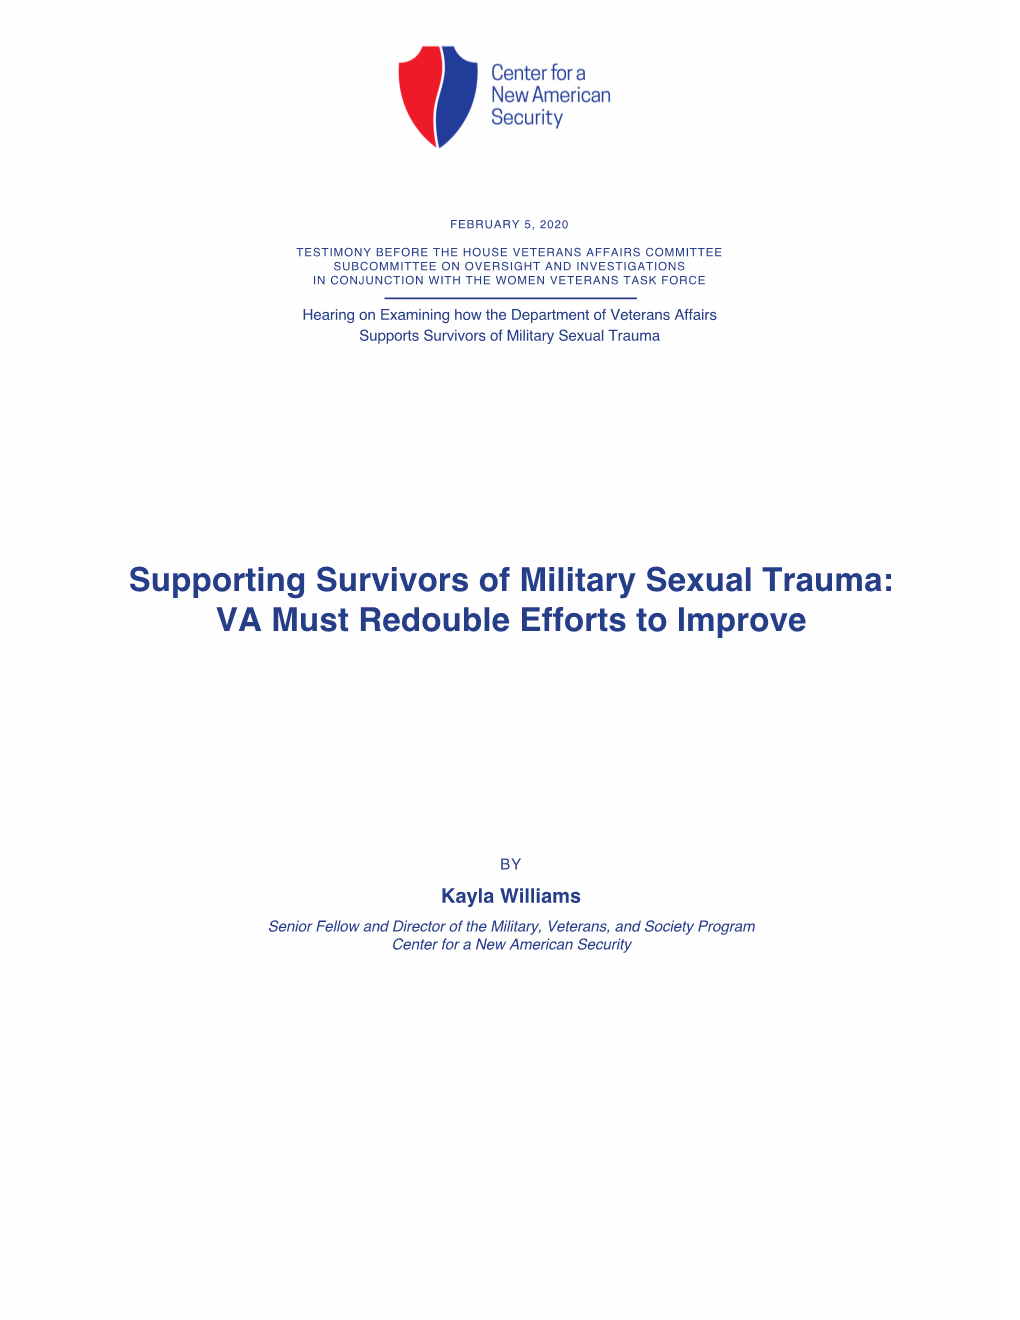 Supporting Survivors of Military Sexual Trauma: VA Must Redouble Efforts to Improve